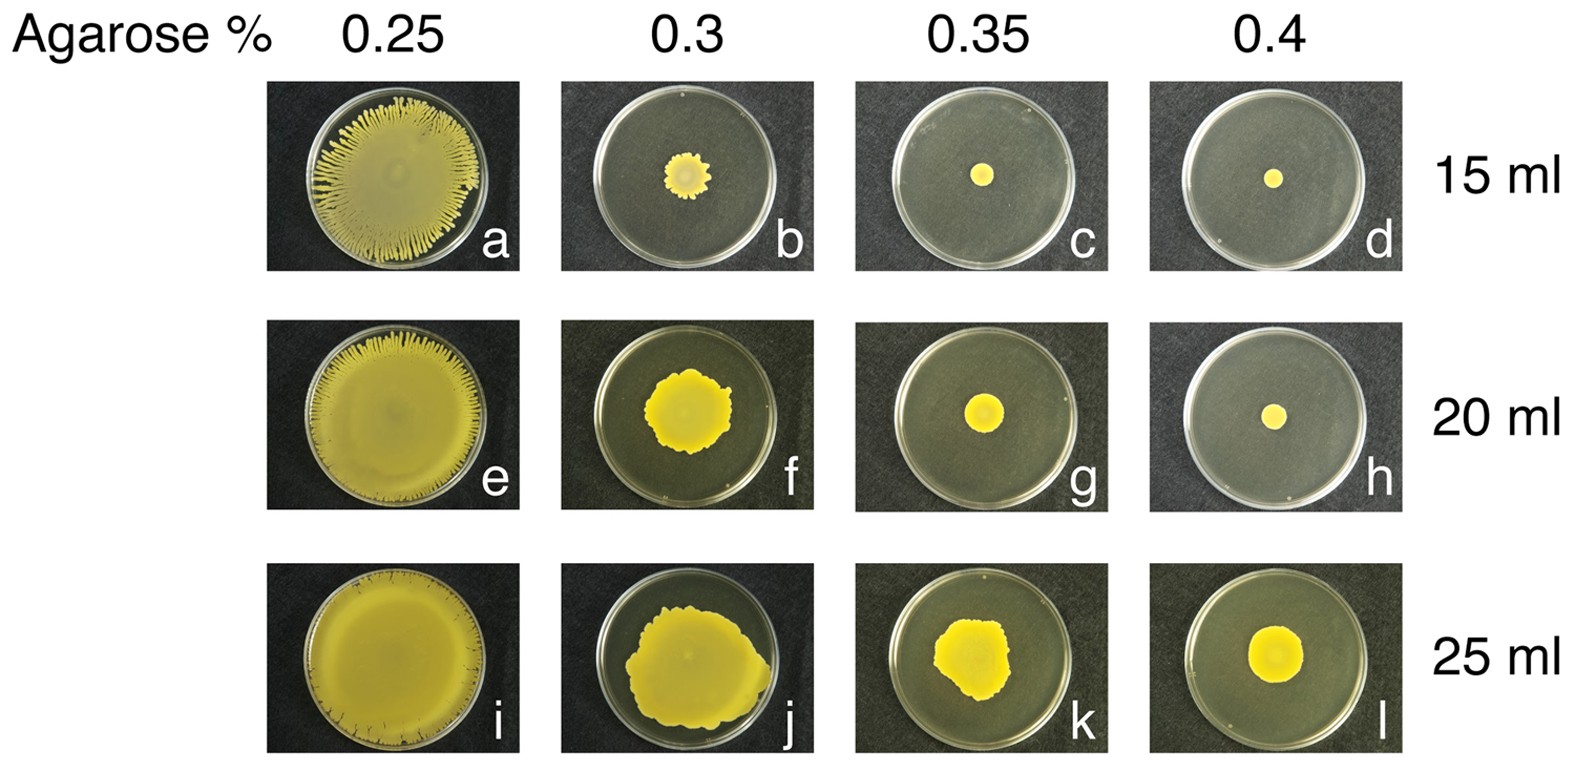 Modulation of Staphylococcus aureus spreading by water | Scientific Reports